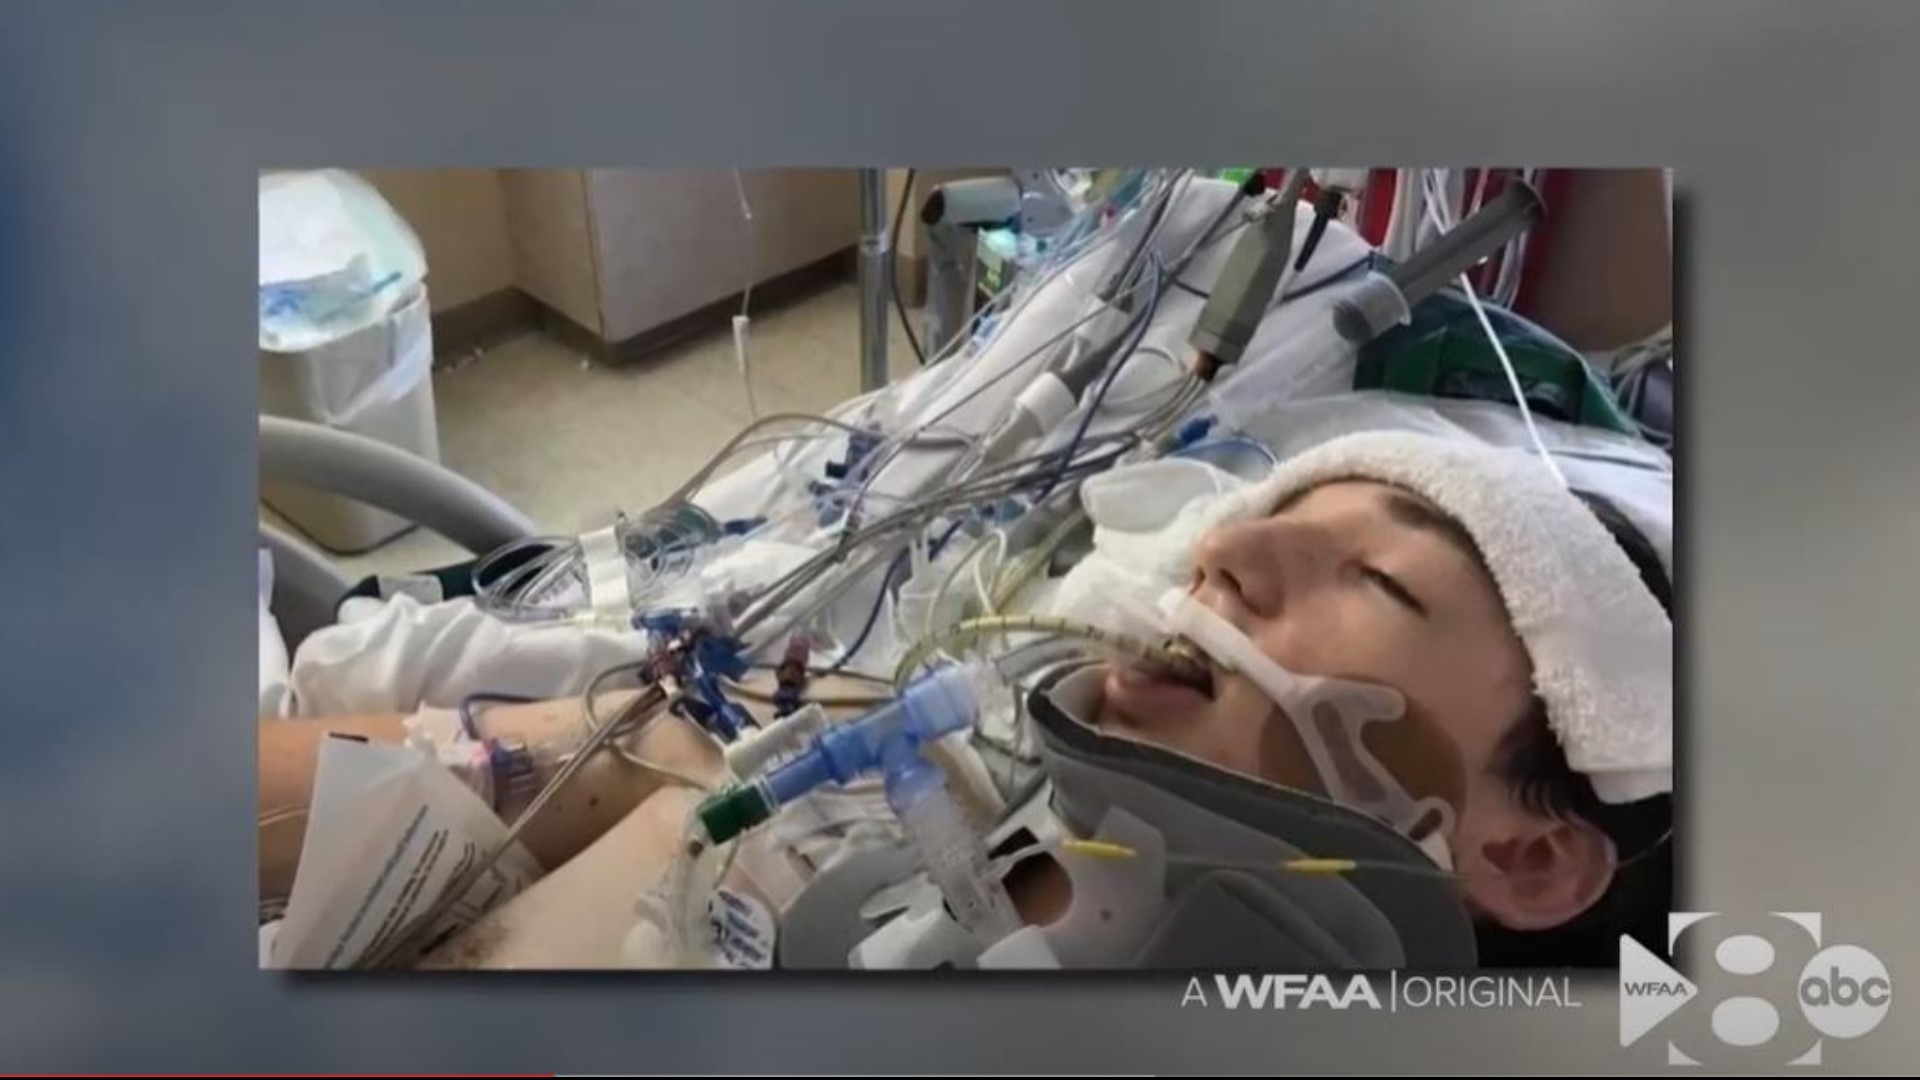 Four months after a near-death lightning strike, a Keller teen is thankful for the family, friends and doctors fueling his physical and emotional recovery.